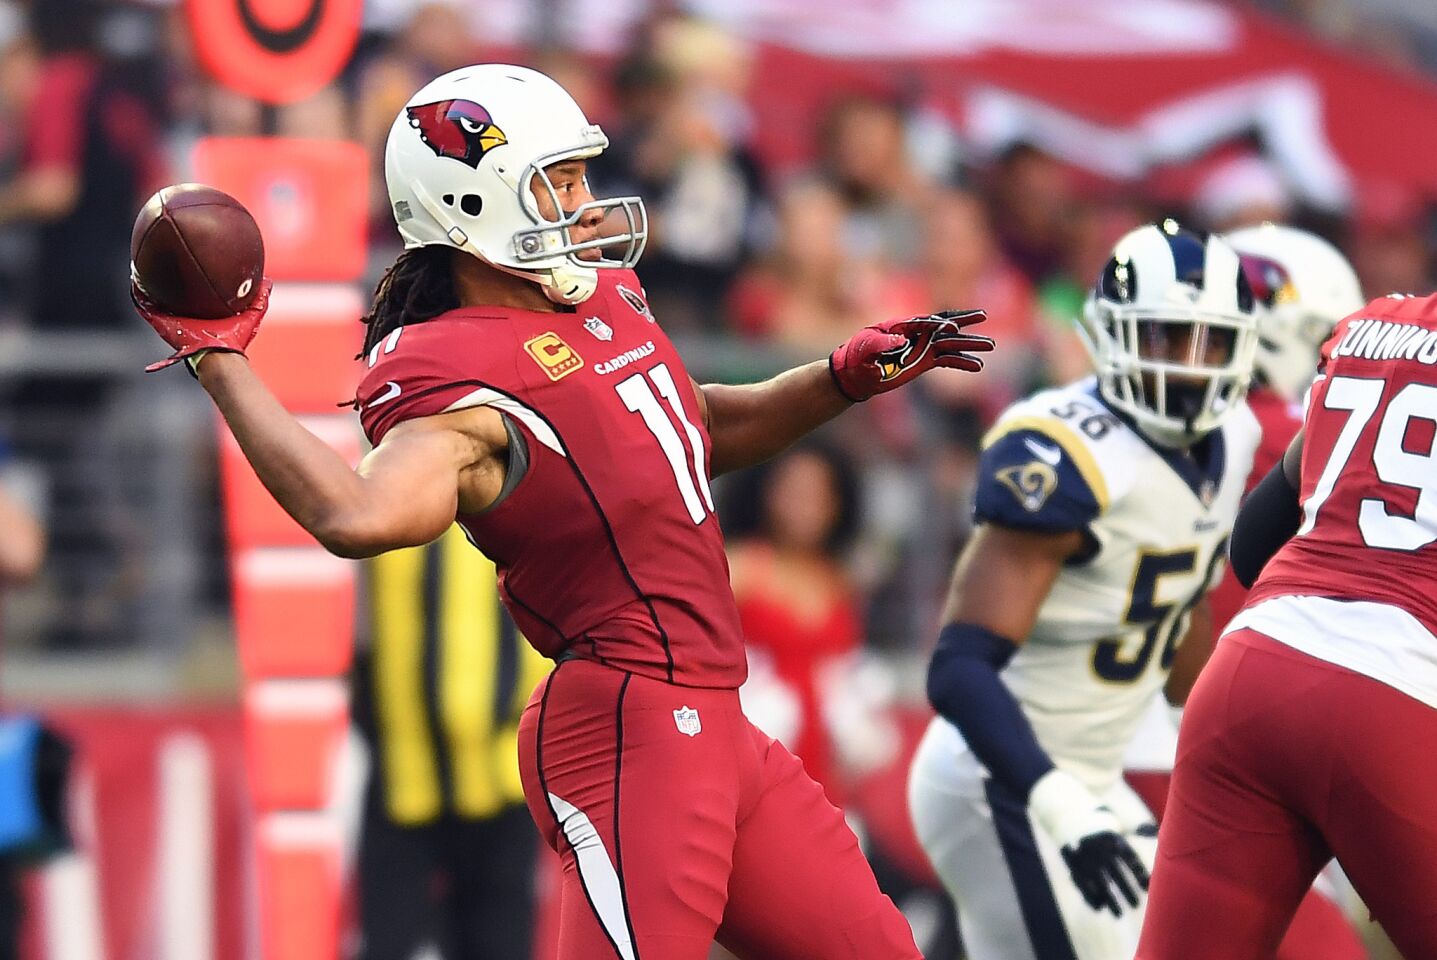 Arizona Cardinals wide receiver Larry Fitzgerald throws a touchdown pass against the Rams in the second quarter at State Farm Stadium on Sunday.